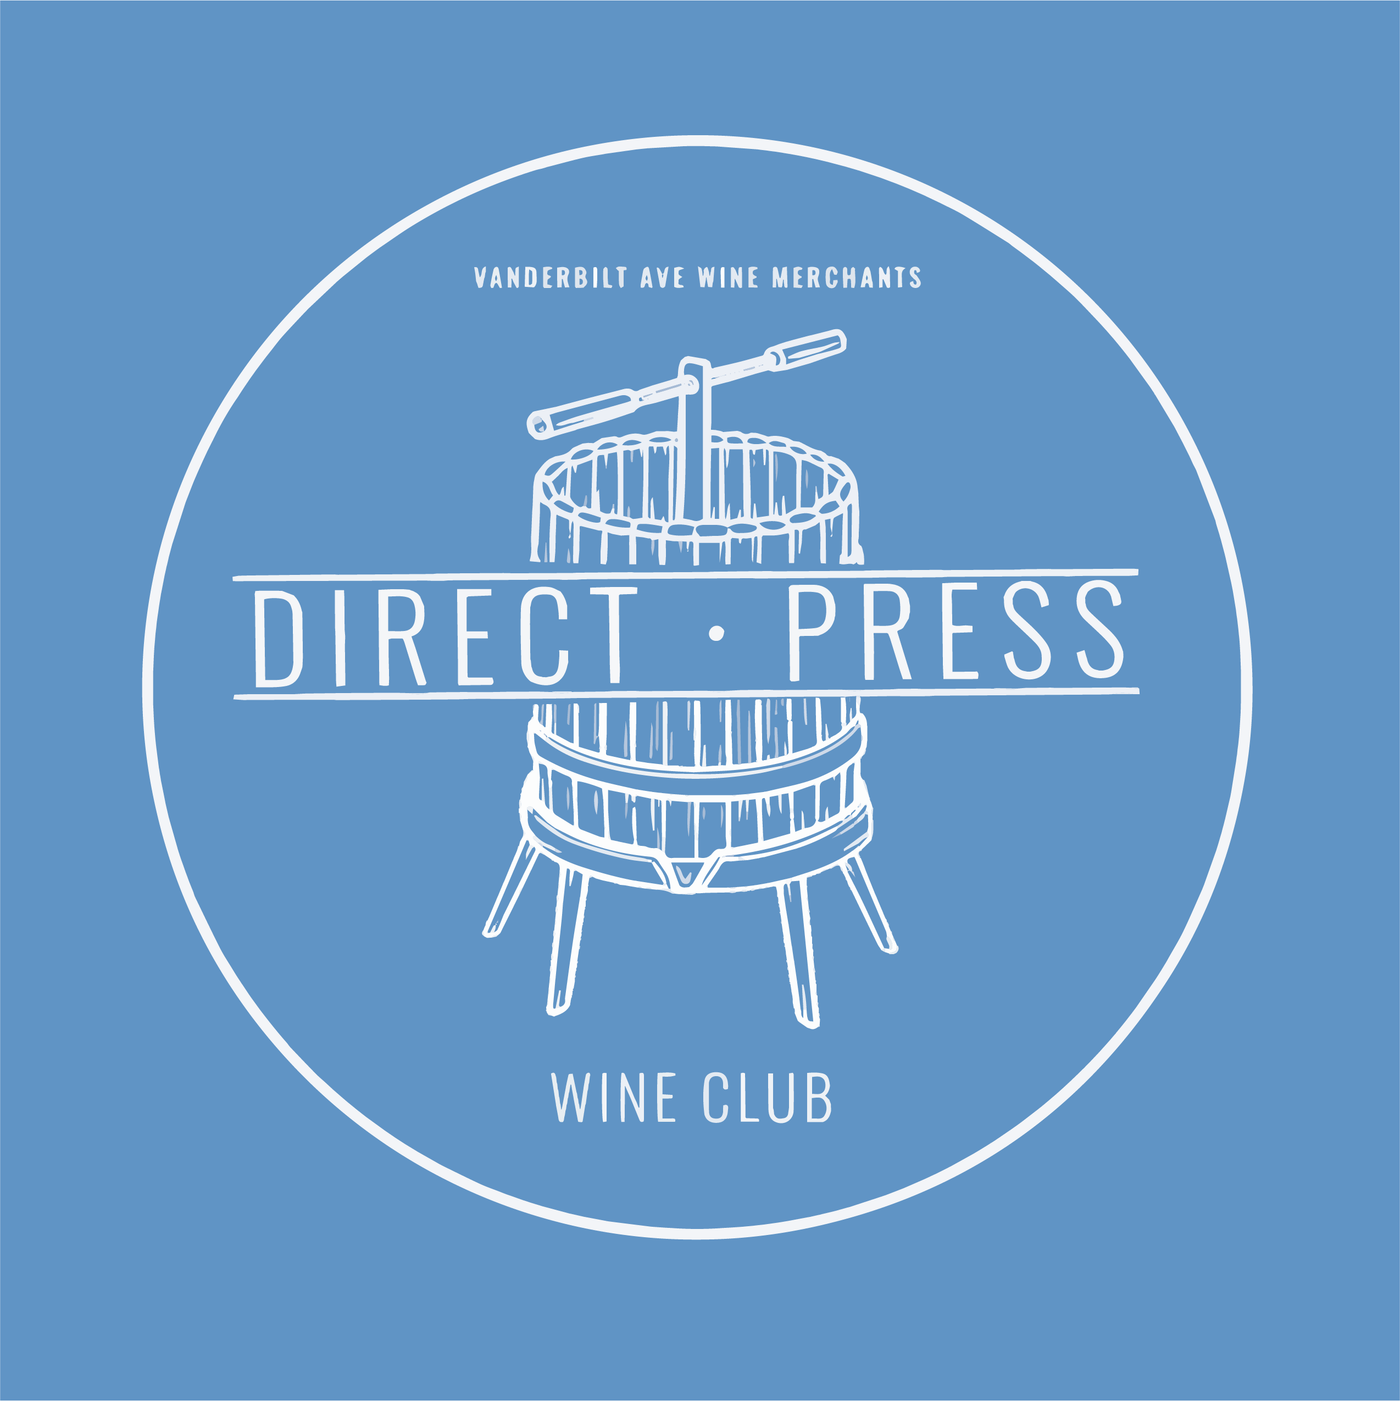 DIRECT PRESS • 4 MONTH GIFT